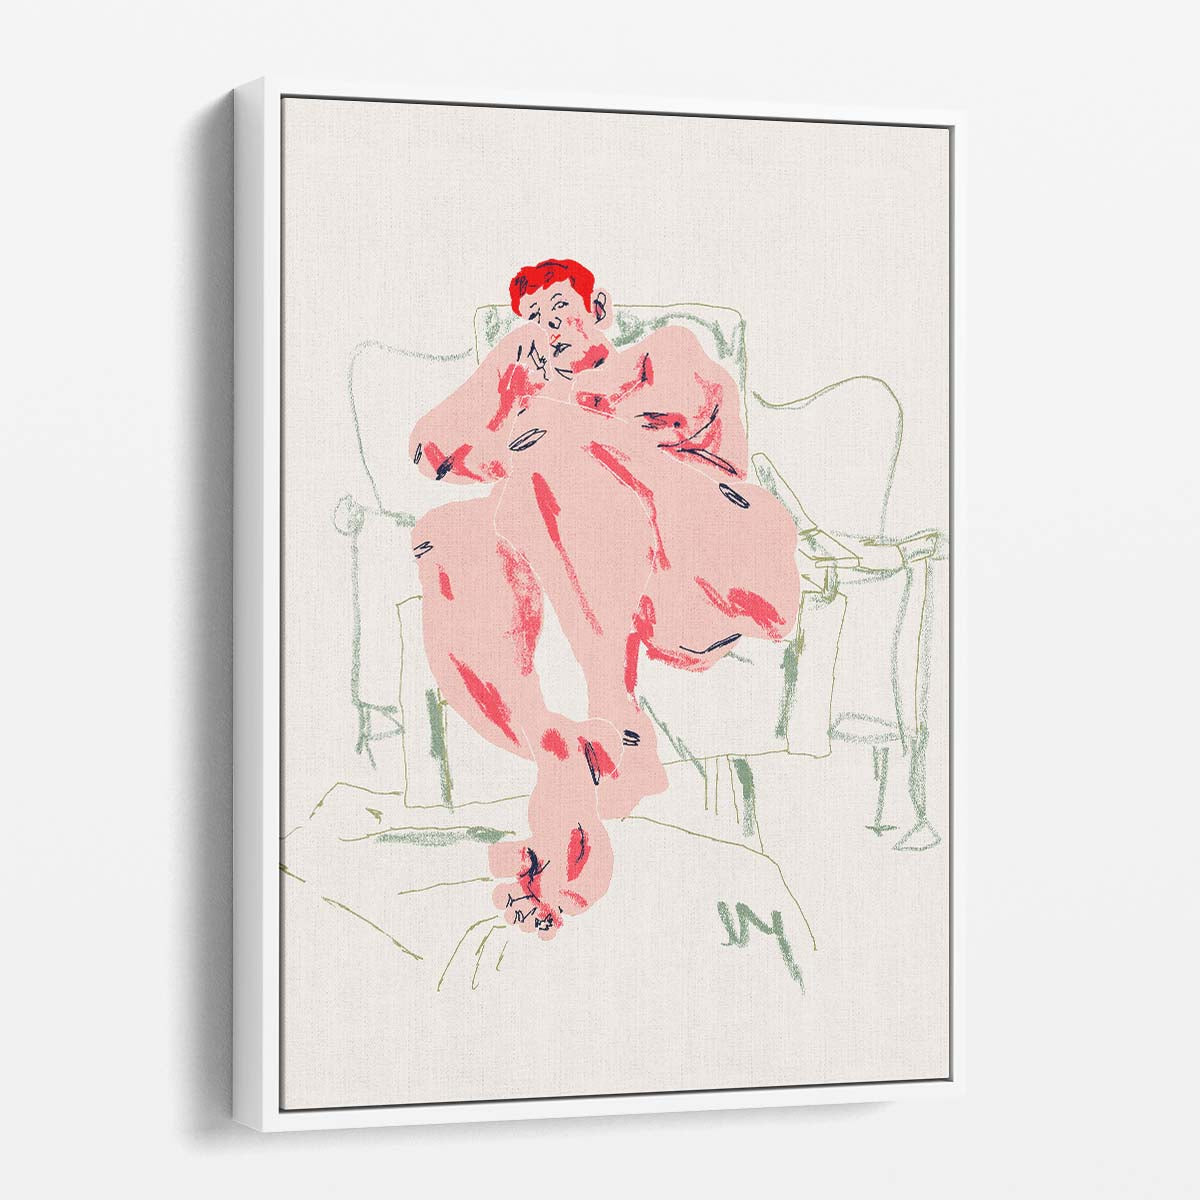 Francesco Gulina's Nude Model Chair Illustration Artwork by Luxuriance Designs, made in USA